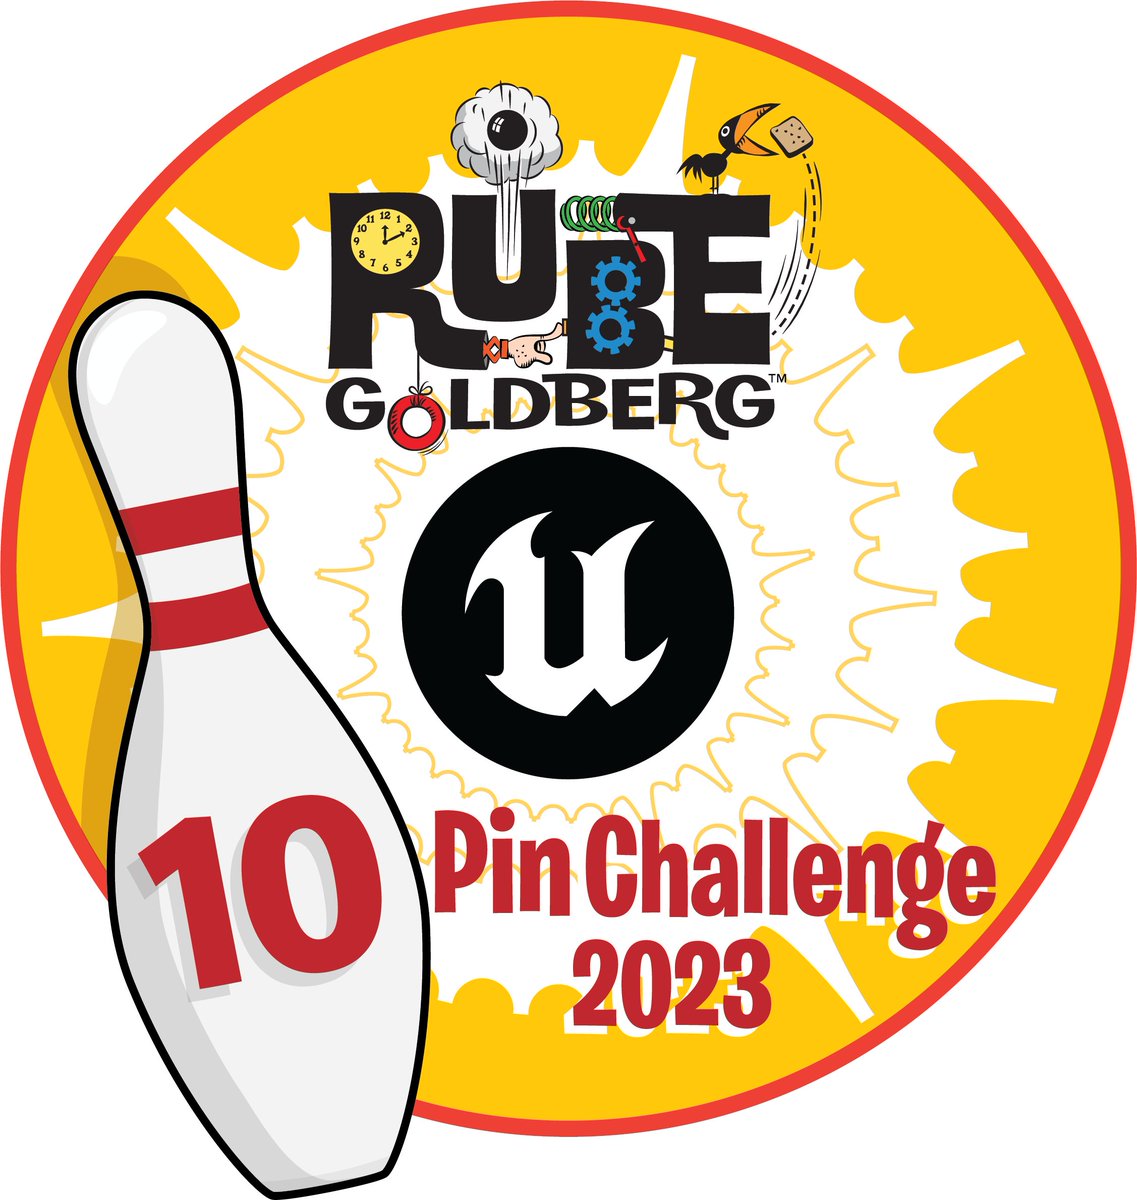 It's the home stretch! Submissions close Thurs (Nov 30) for the #UnrealEngine @RubeGoldberg 10-Pin Challenge! Finish your projects and record your video! We can't wait to see the amazing wild & wacky pin knocking down machines roll in! Contest page: rubegoldberg.org/rube-goldberg-…